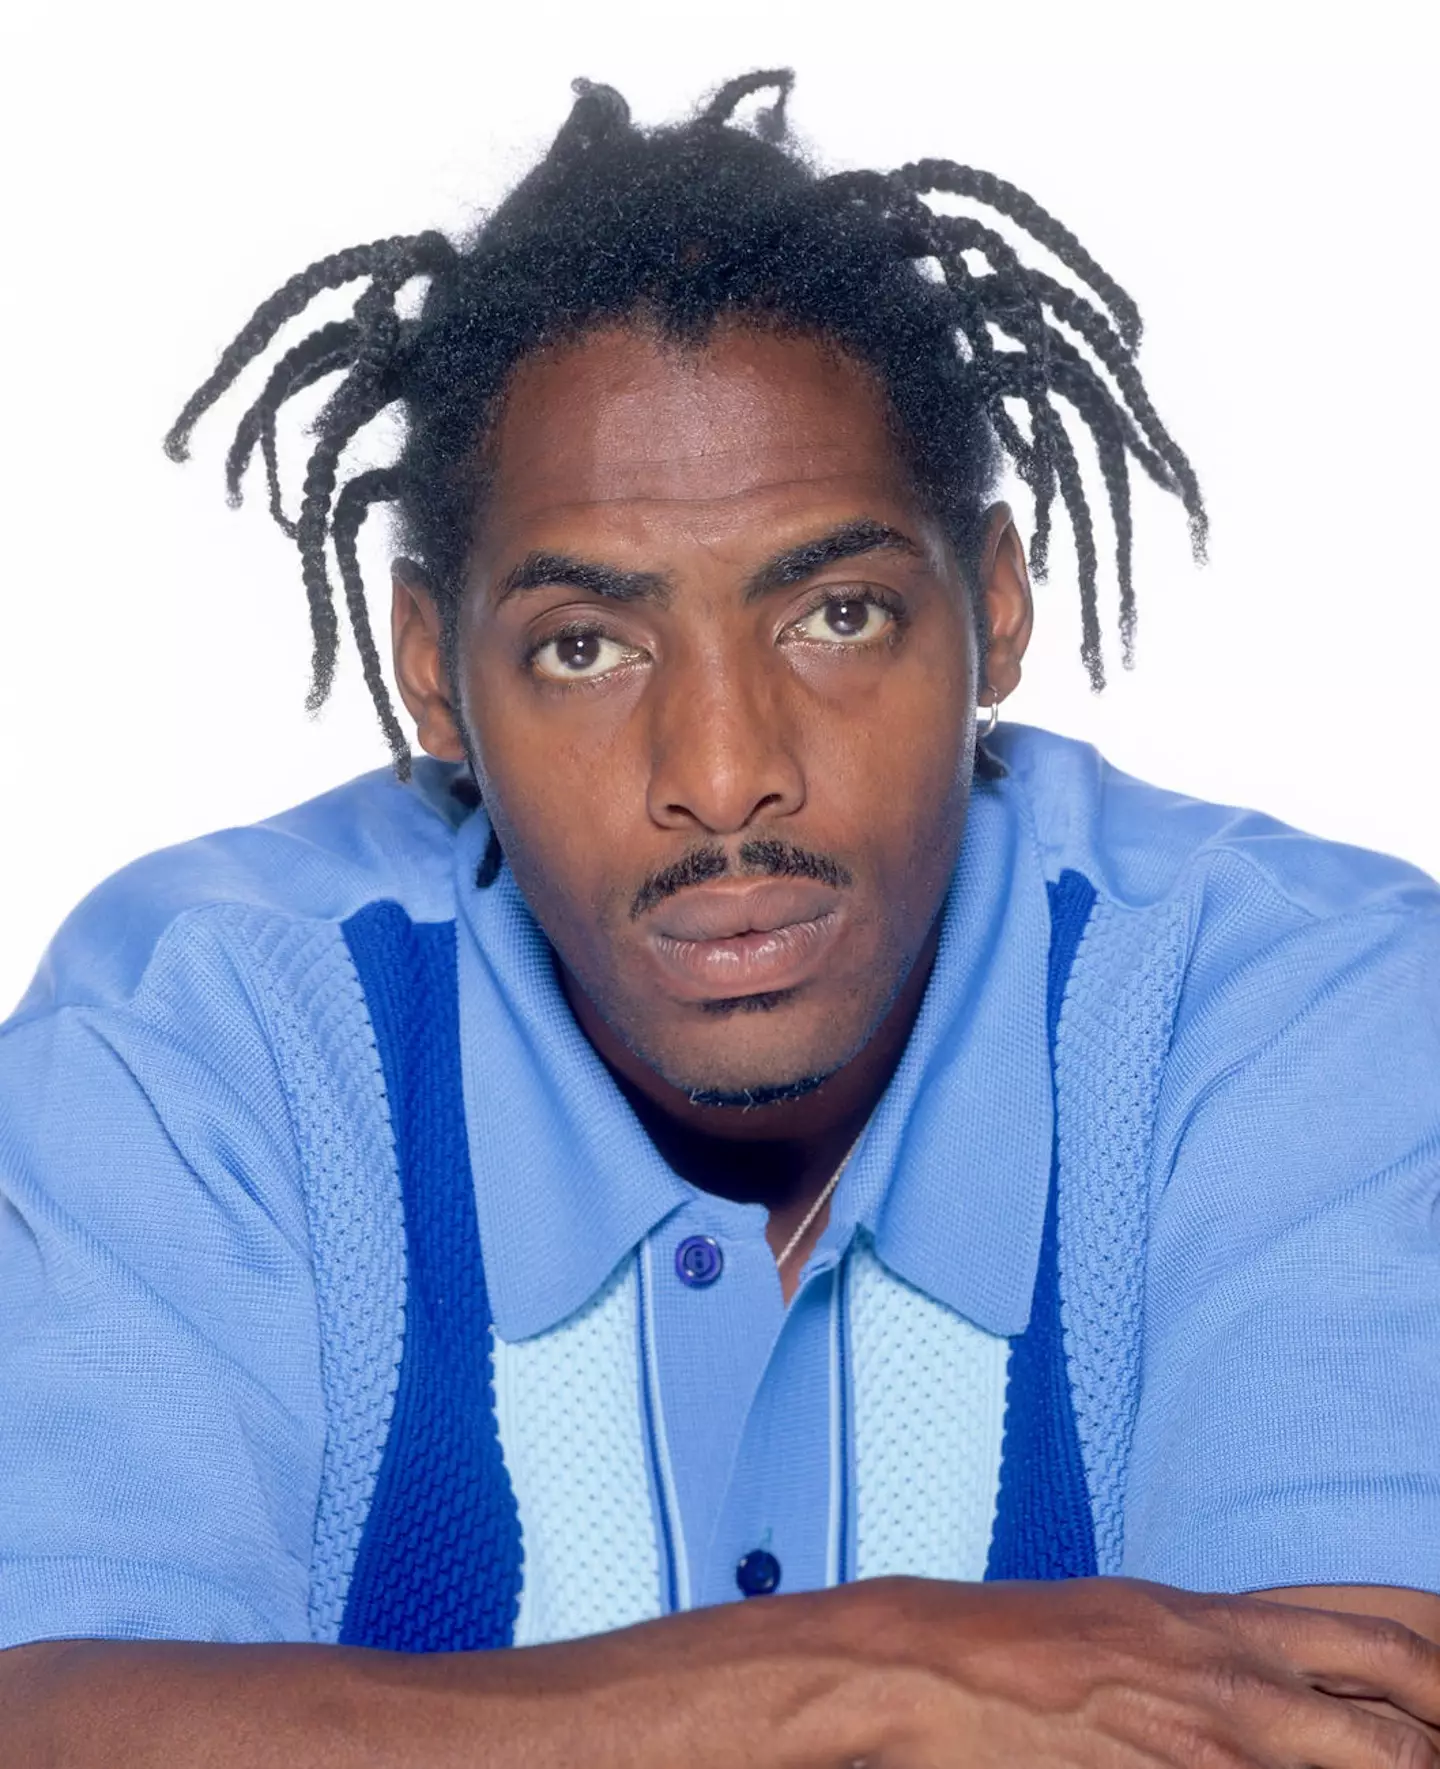 Coolio passed away in September.